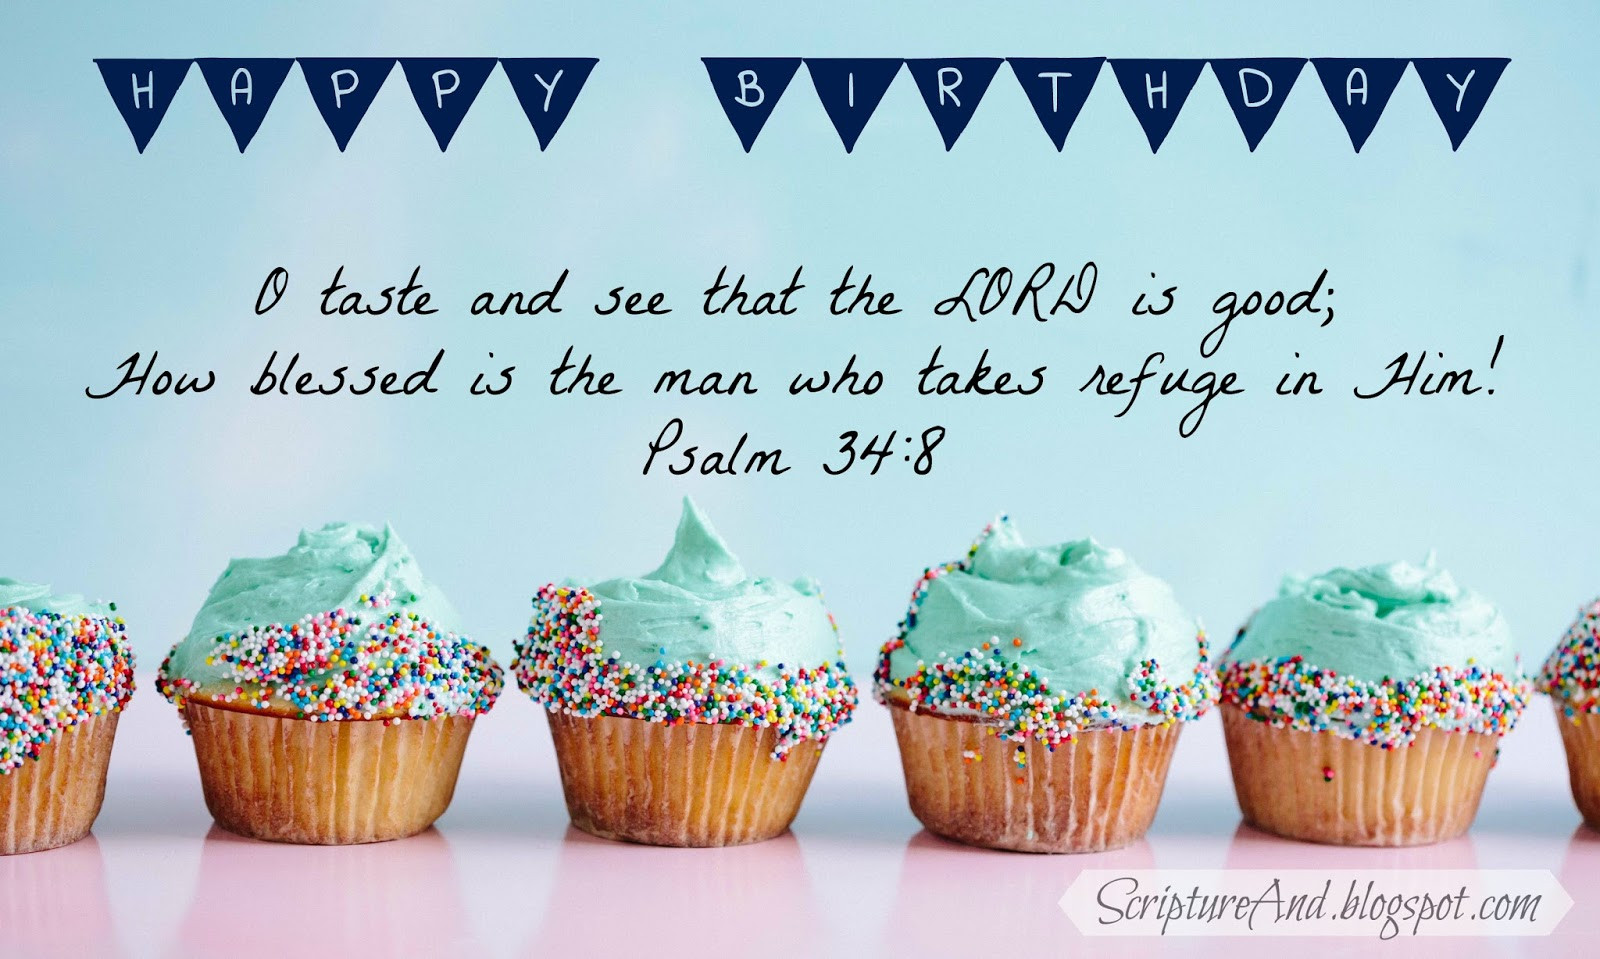 Biblical Birthday Quotes
 Scripture and Free Birthday with Bible Verses